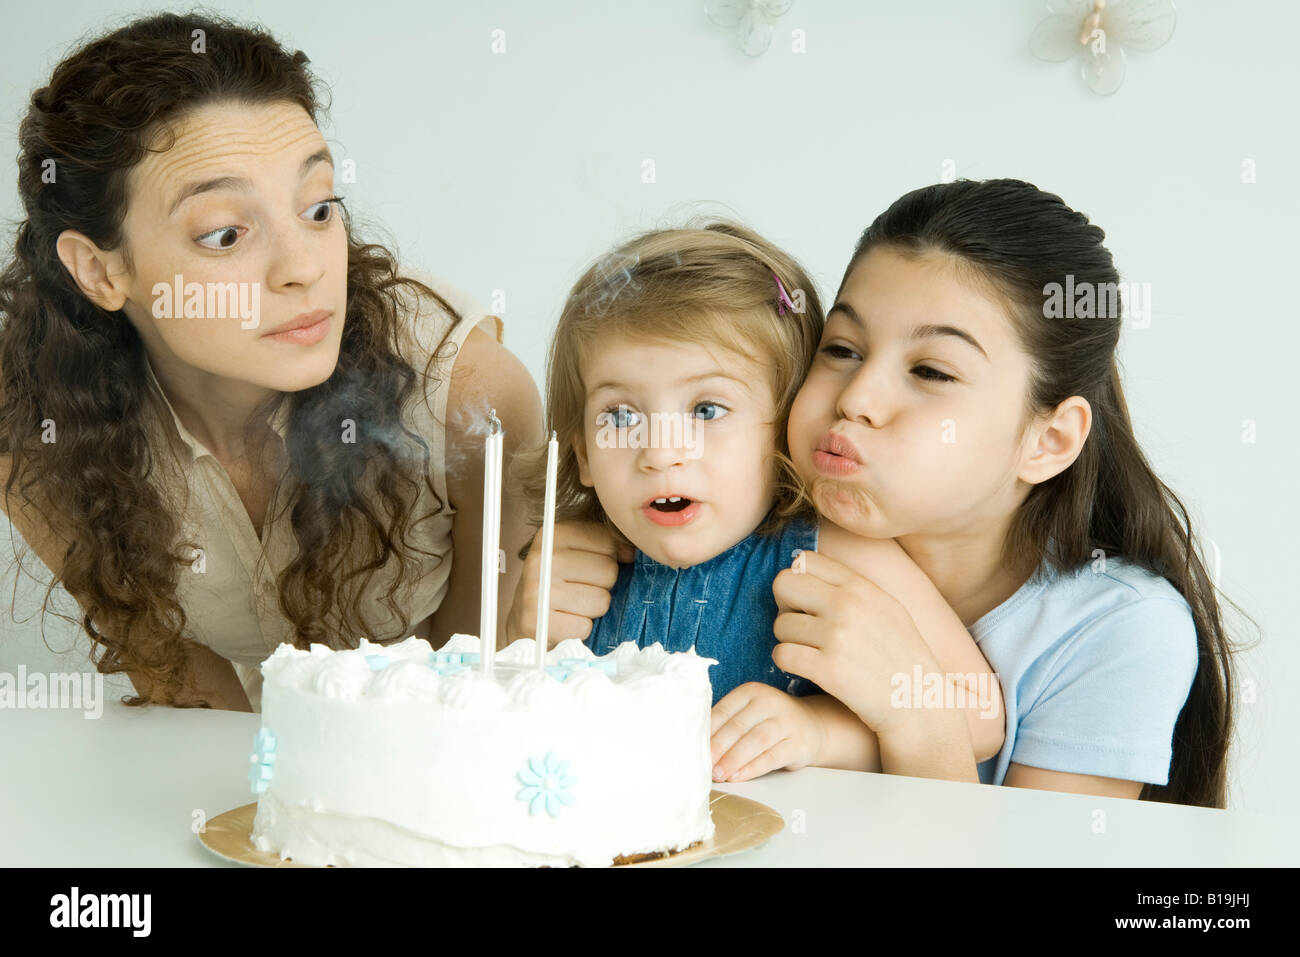 Girl helping younger sister blow out candles on birthday cake, mother watching Stock Photo